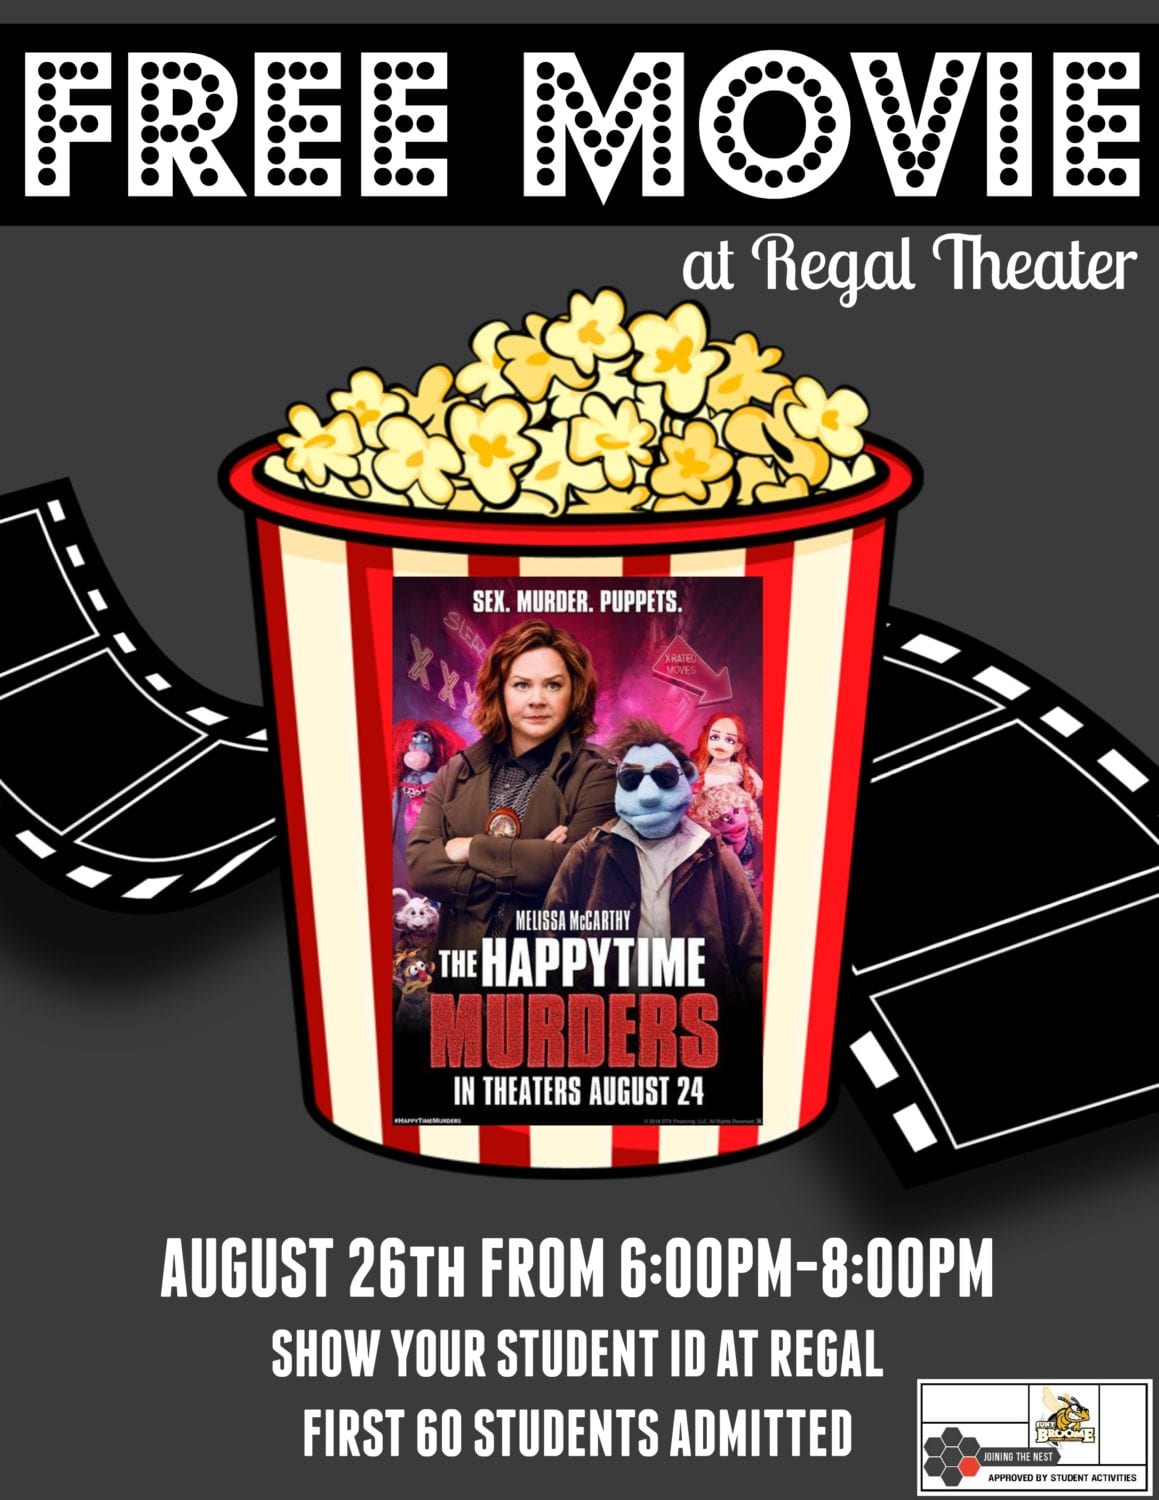 Free Movie Night Aug. 26 at Regal — ‘The Happytime Murders’